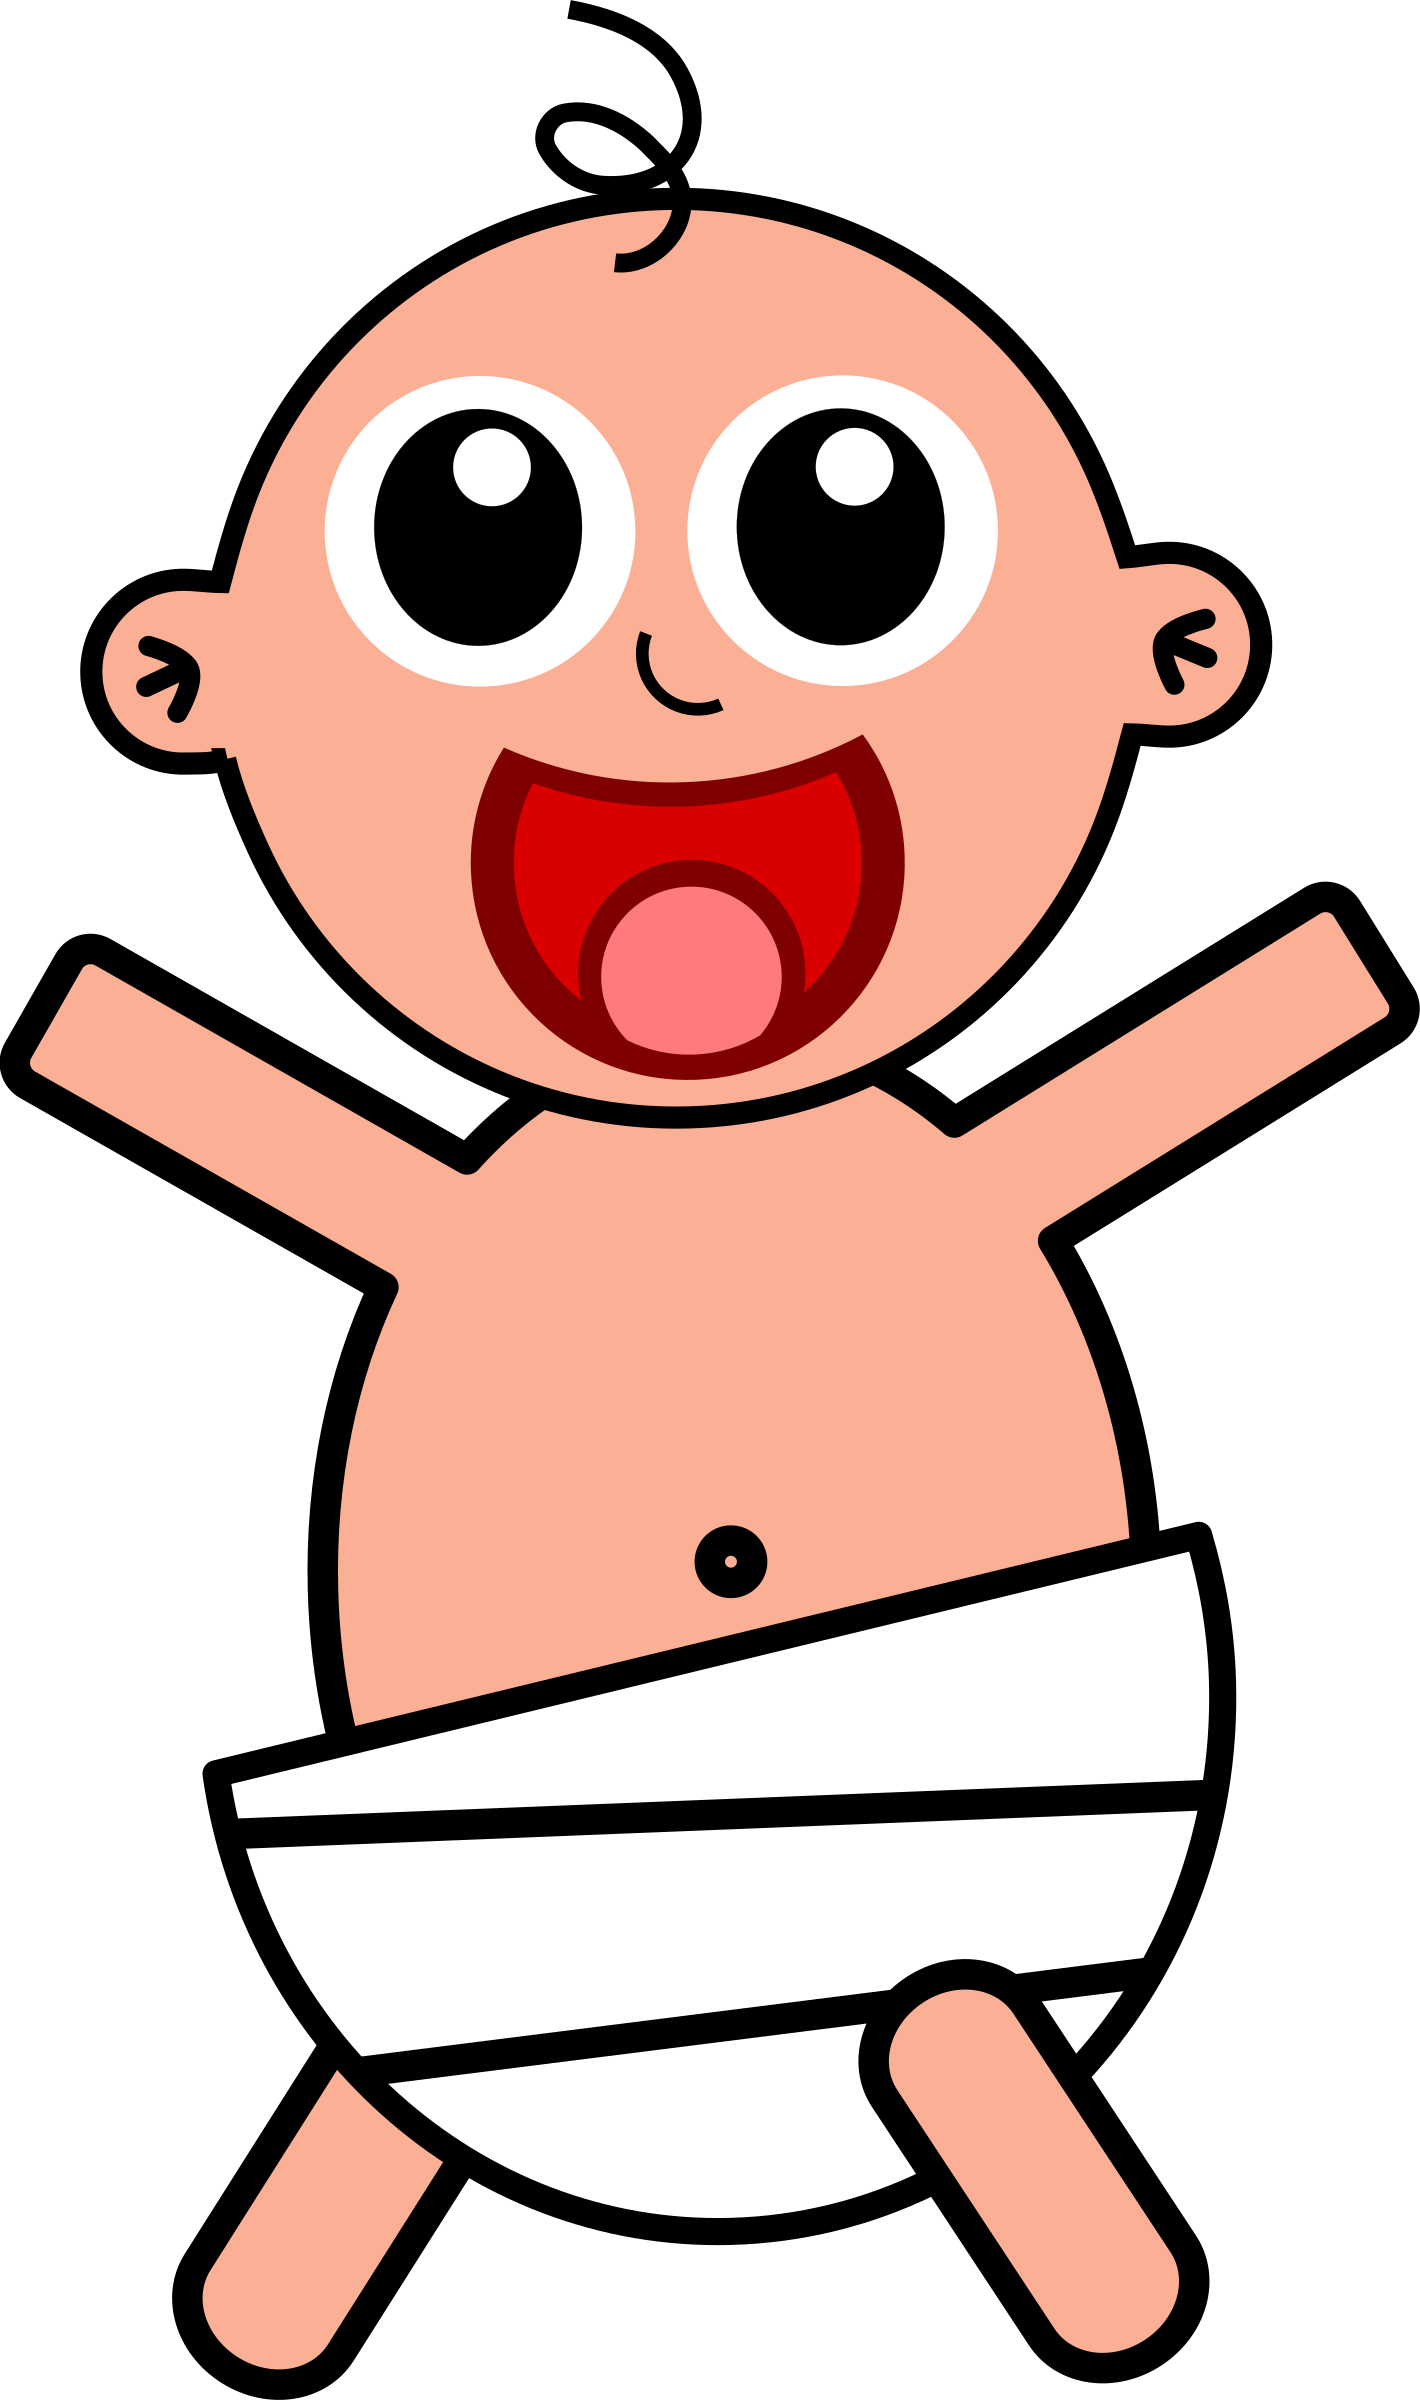 Babies clipart cute. Baby big image png